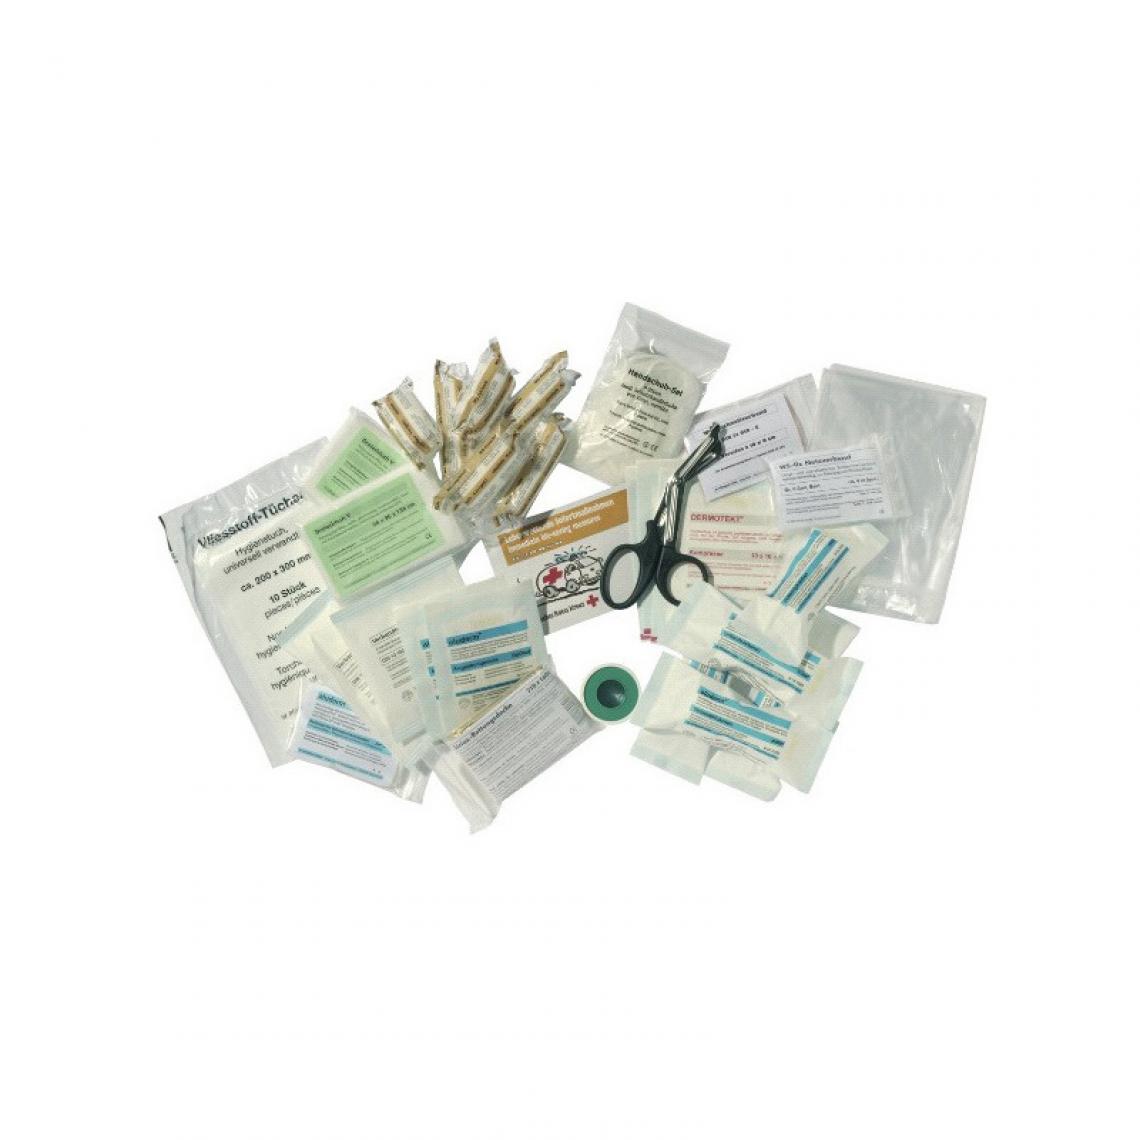 Durable - DURABLE FIRST AID KIT L, Recharge premiers soins, DIN 13157 () - Protections corps